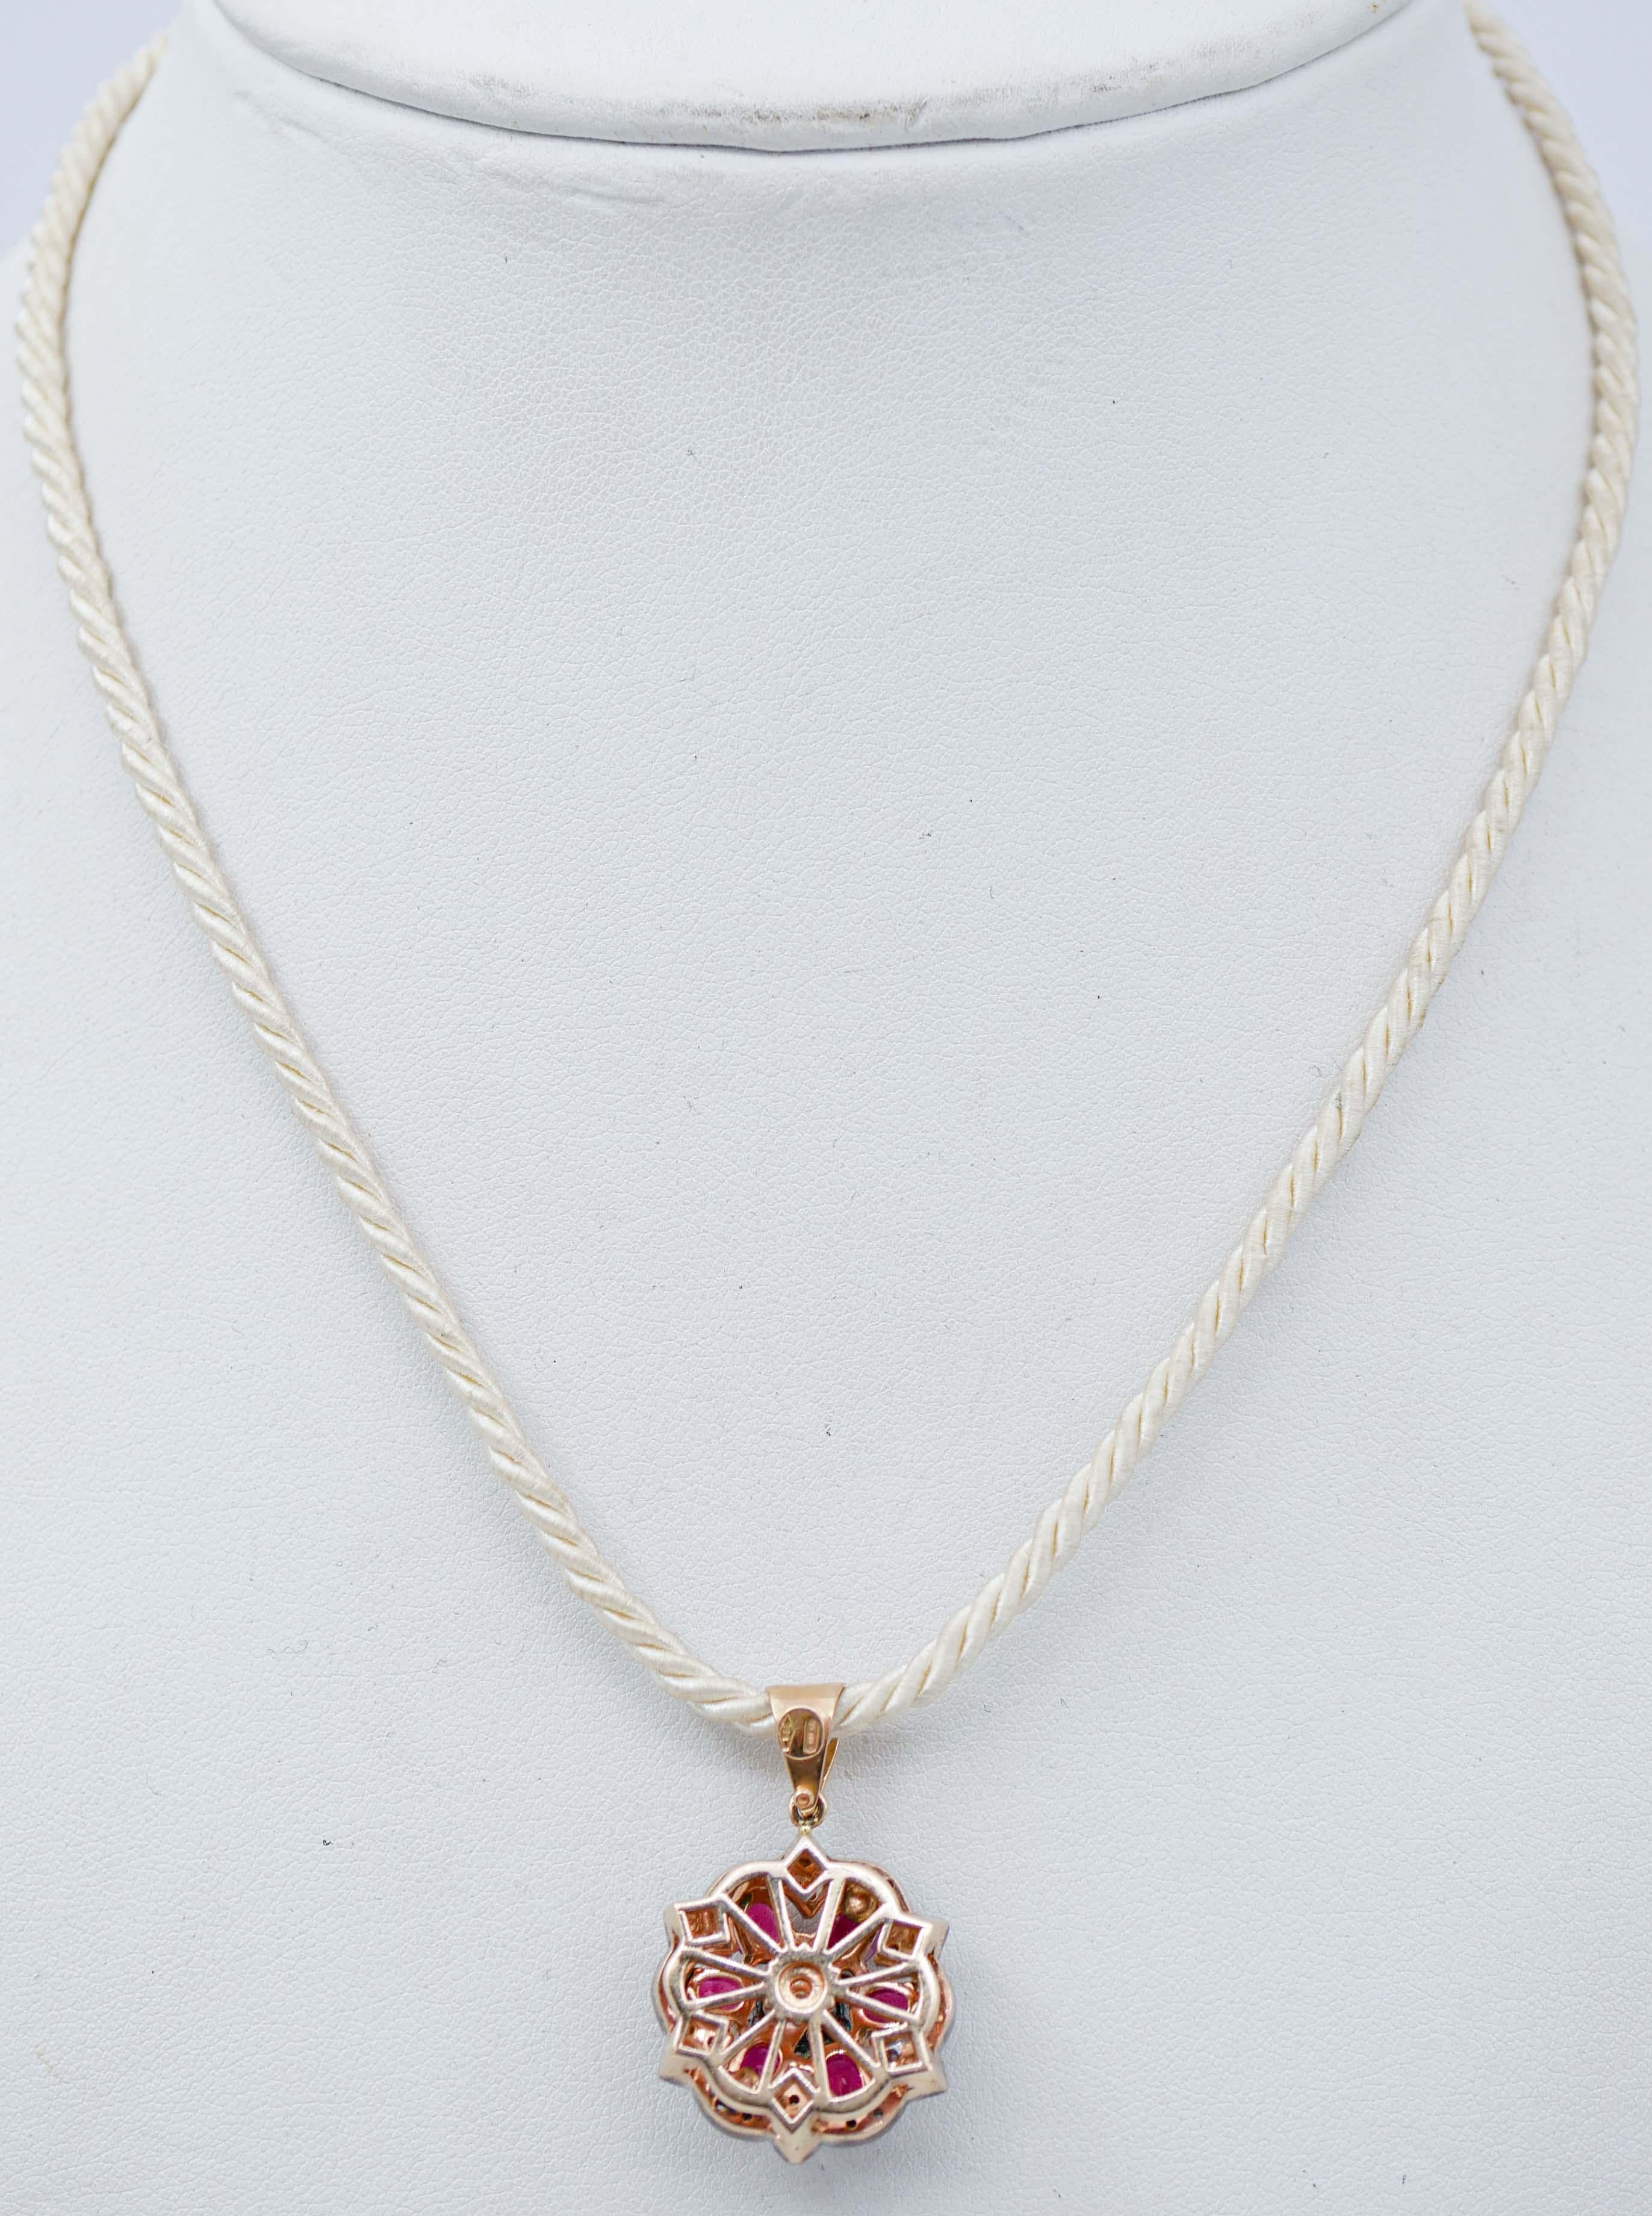 Mixed Cut Rubies, Diamonds, 14 Karat Rose Gold and Silver Pendant Necklace. For Sale